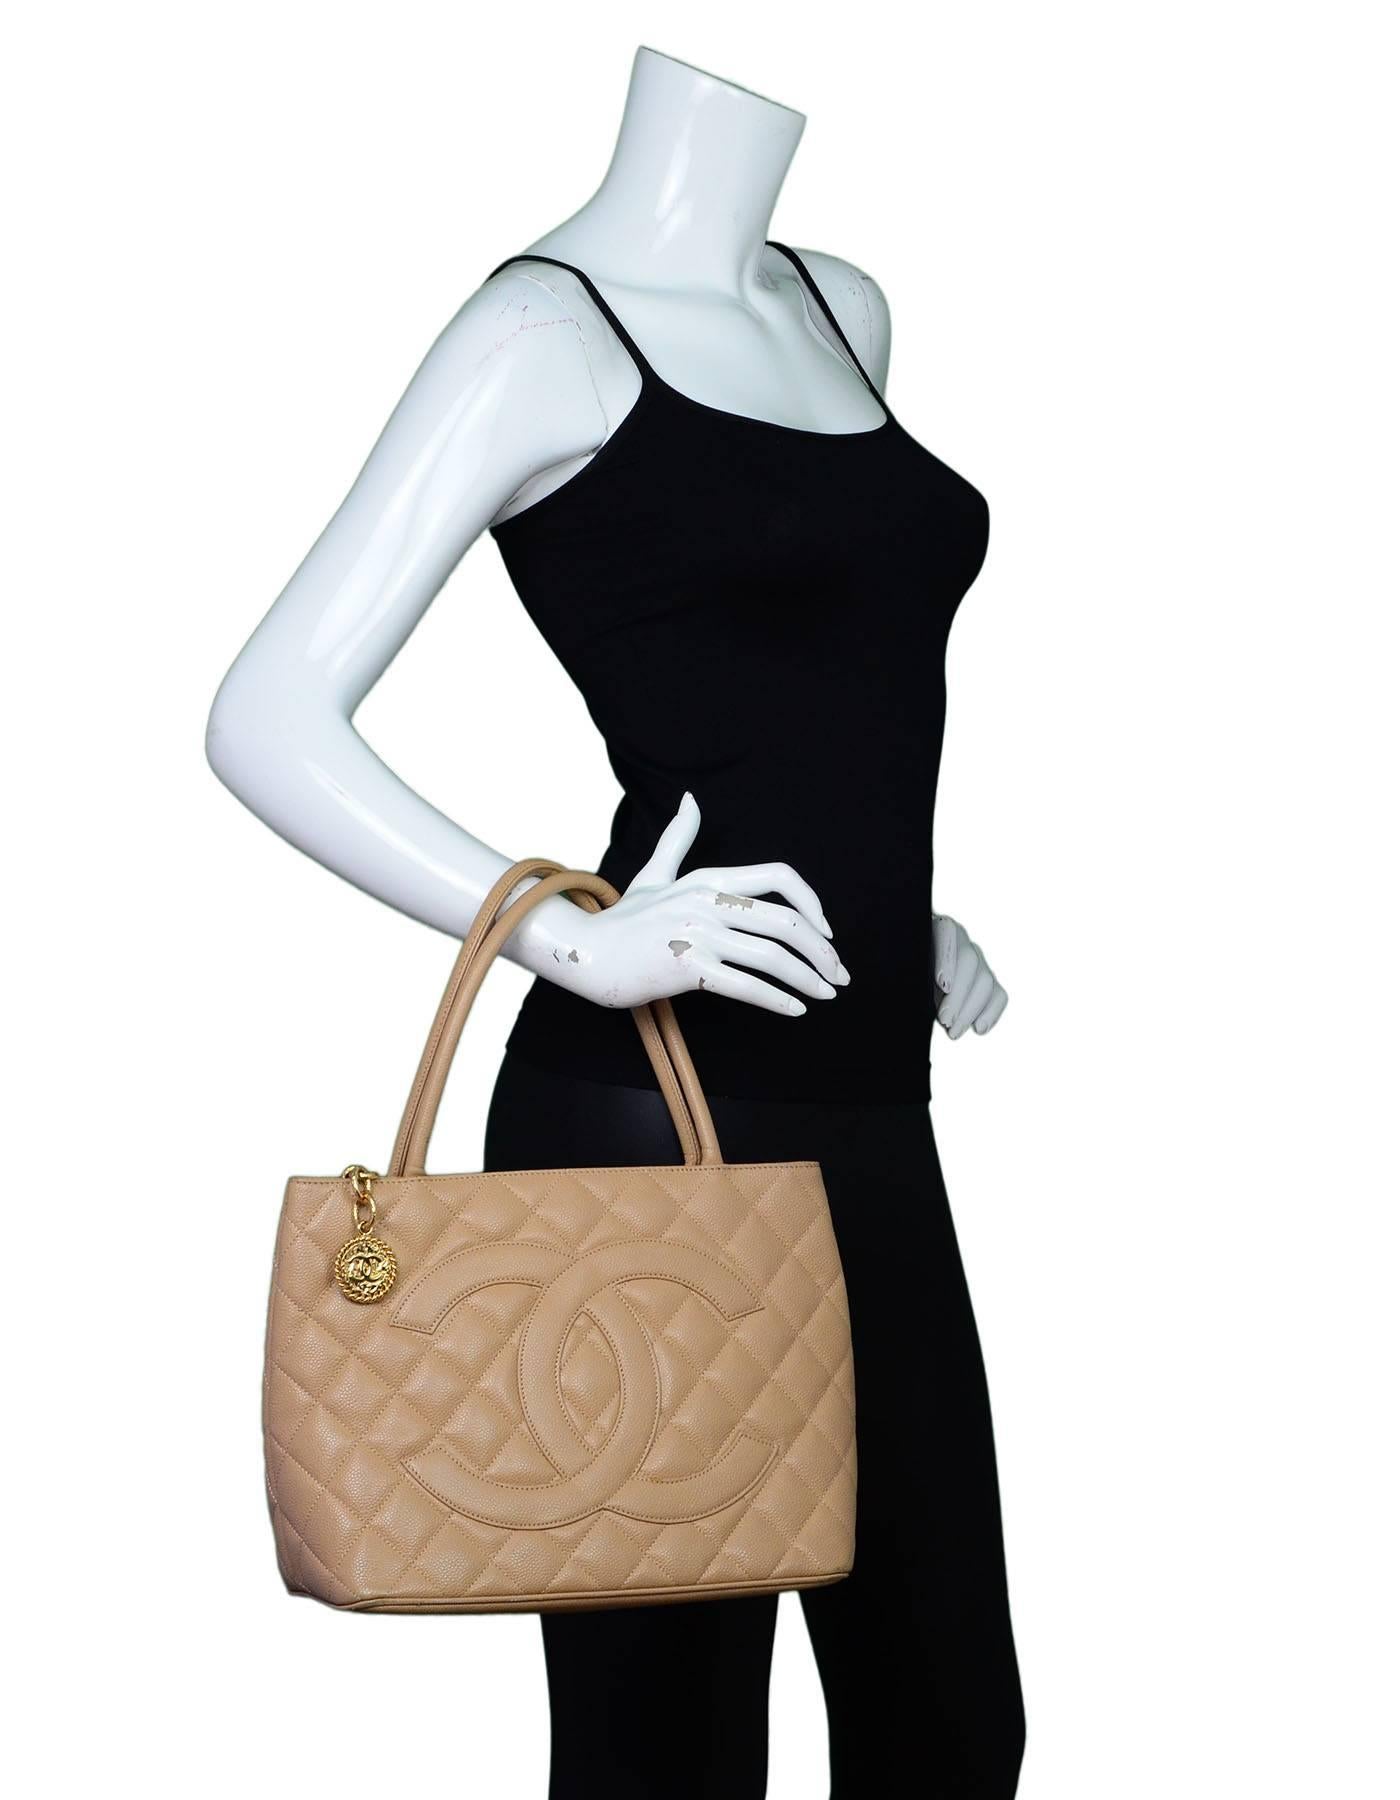 Chanel Beige Caviar Leather Medallion Tote
Features timeless CC at front and quilting throughout

Made In: Italy
Year of Production: 2002-2003
Color: Beige
Interior Lining: Beige leather
Hardware: Goldtone
Materials: Caviar leather,